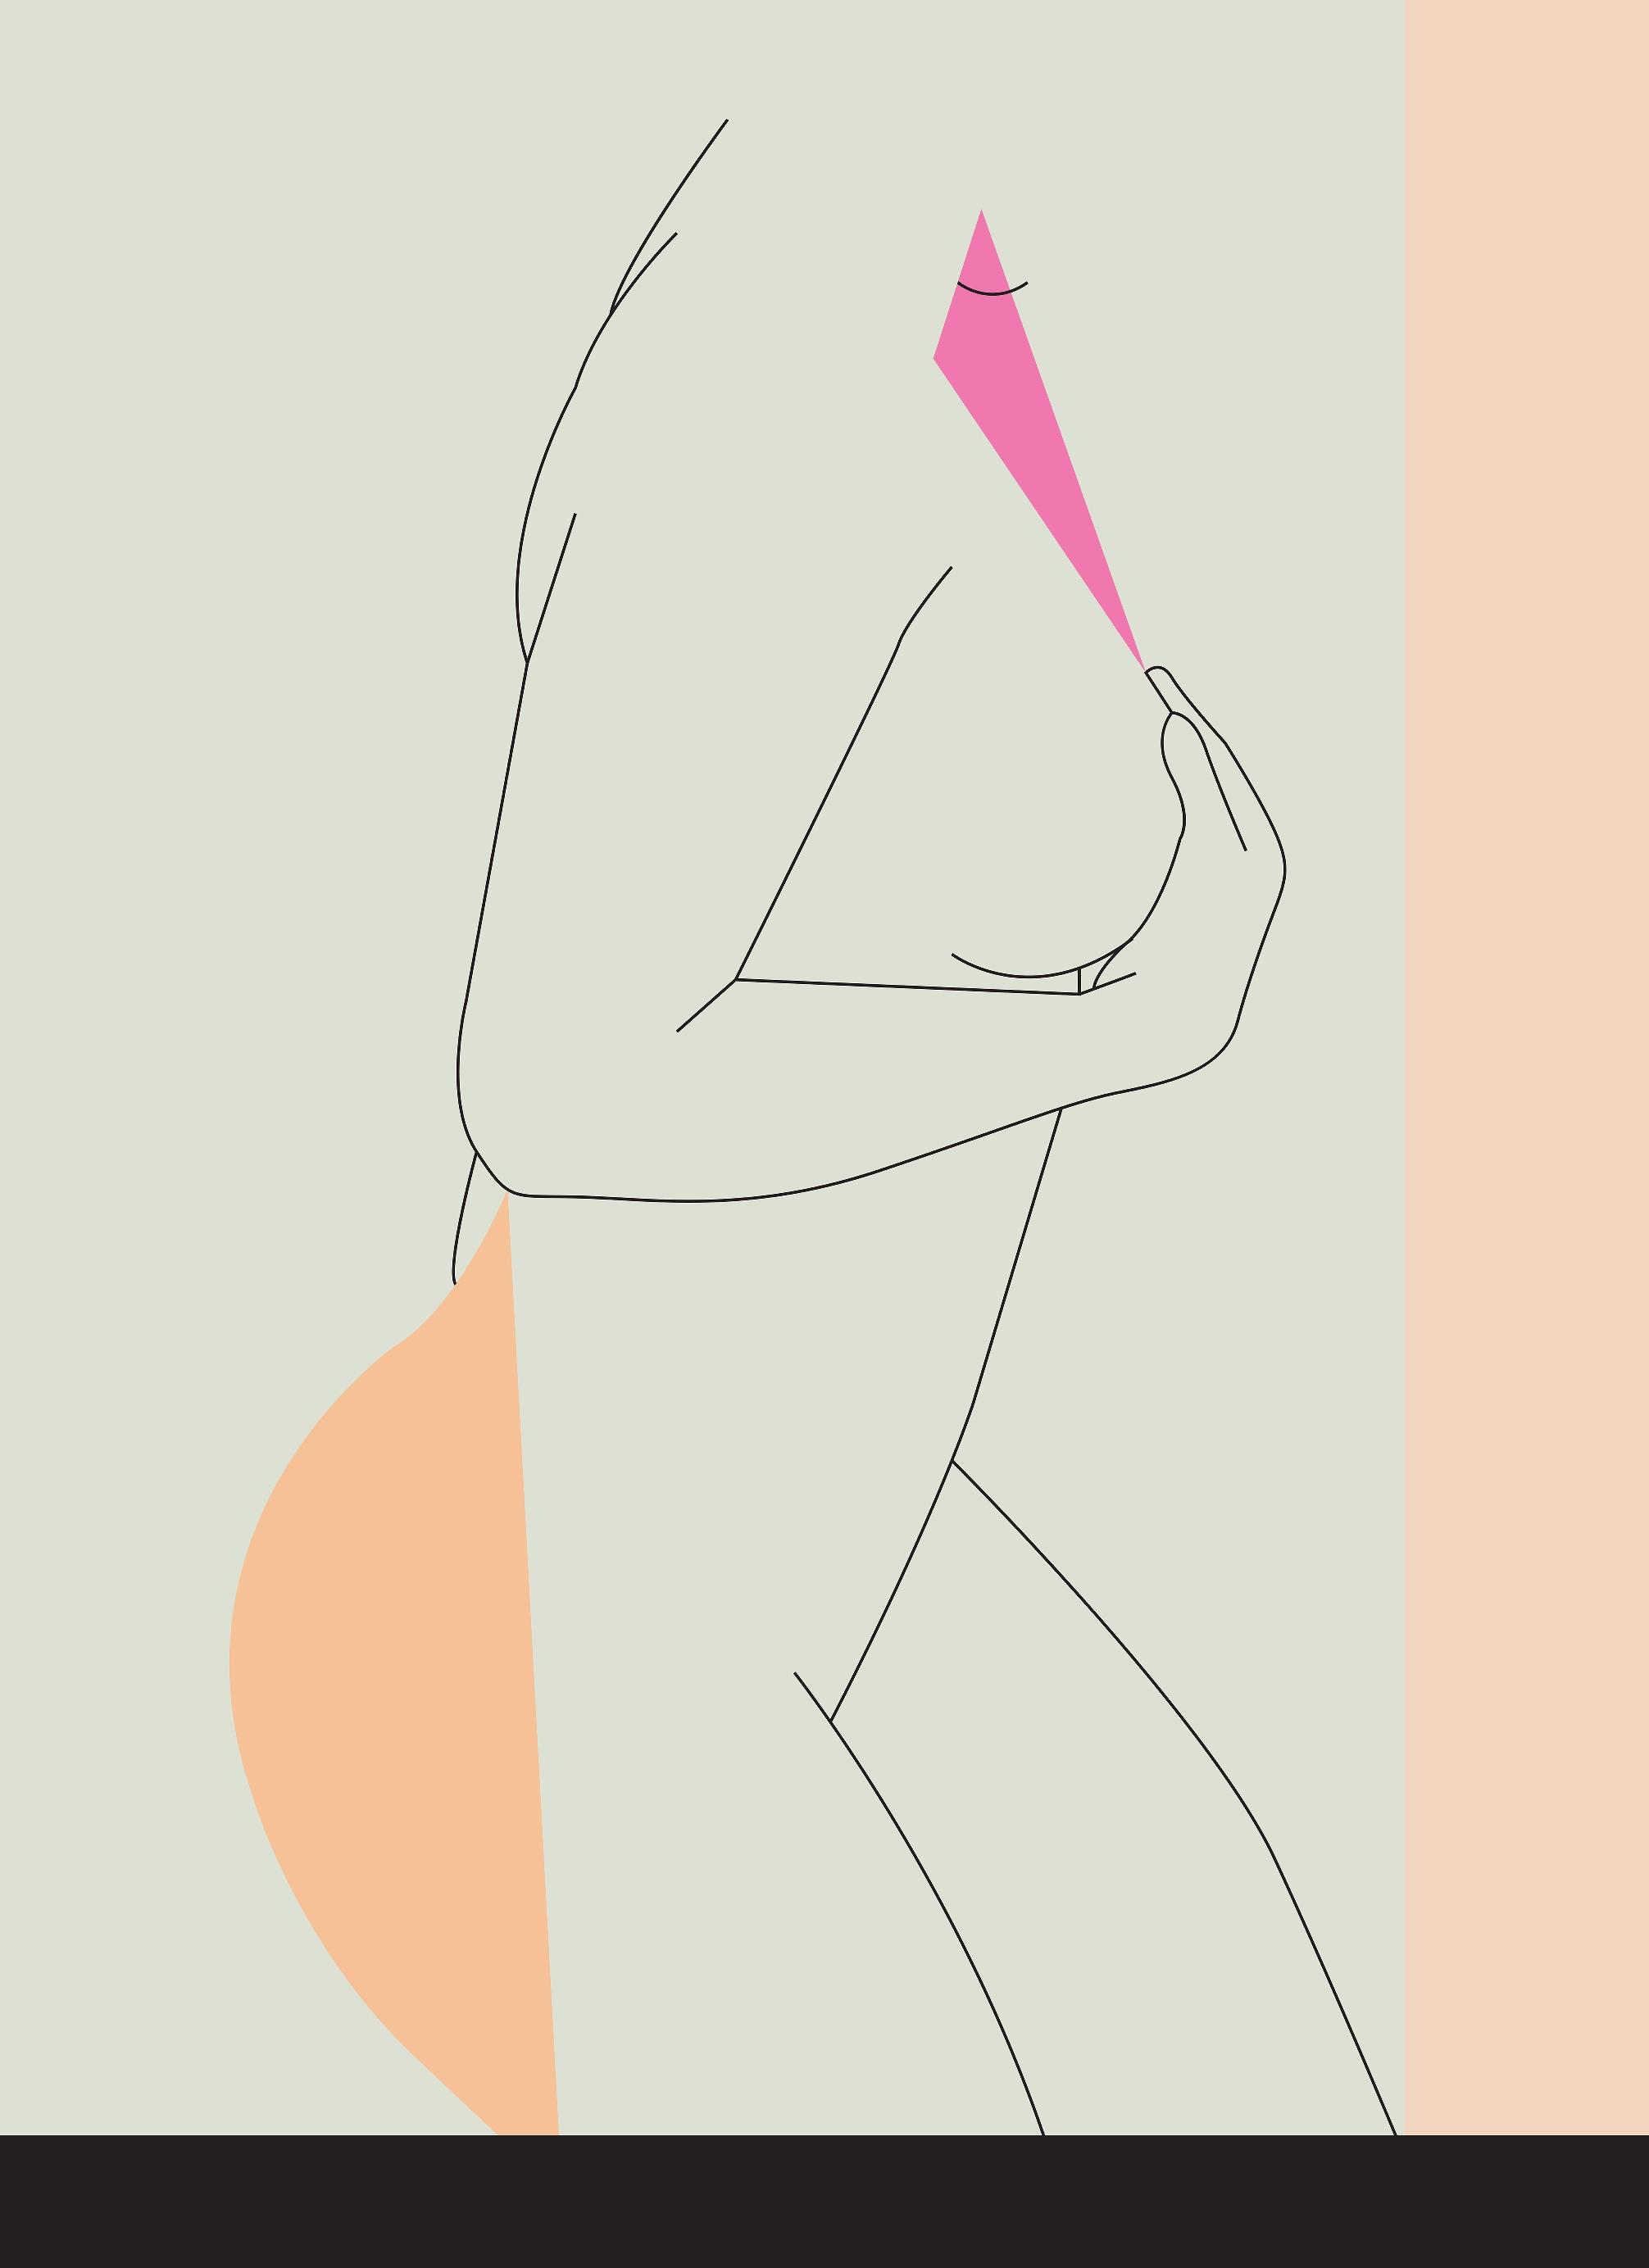 An abstract digital illustration print by Clarrie-Anne on eco fine art paper titled Body showing the side view of a woman drawn as a line drawing with abstract shapes.